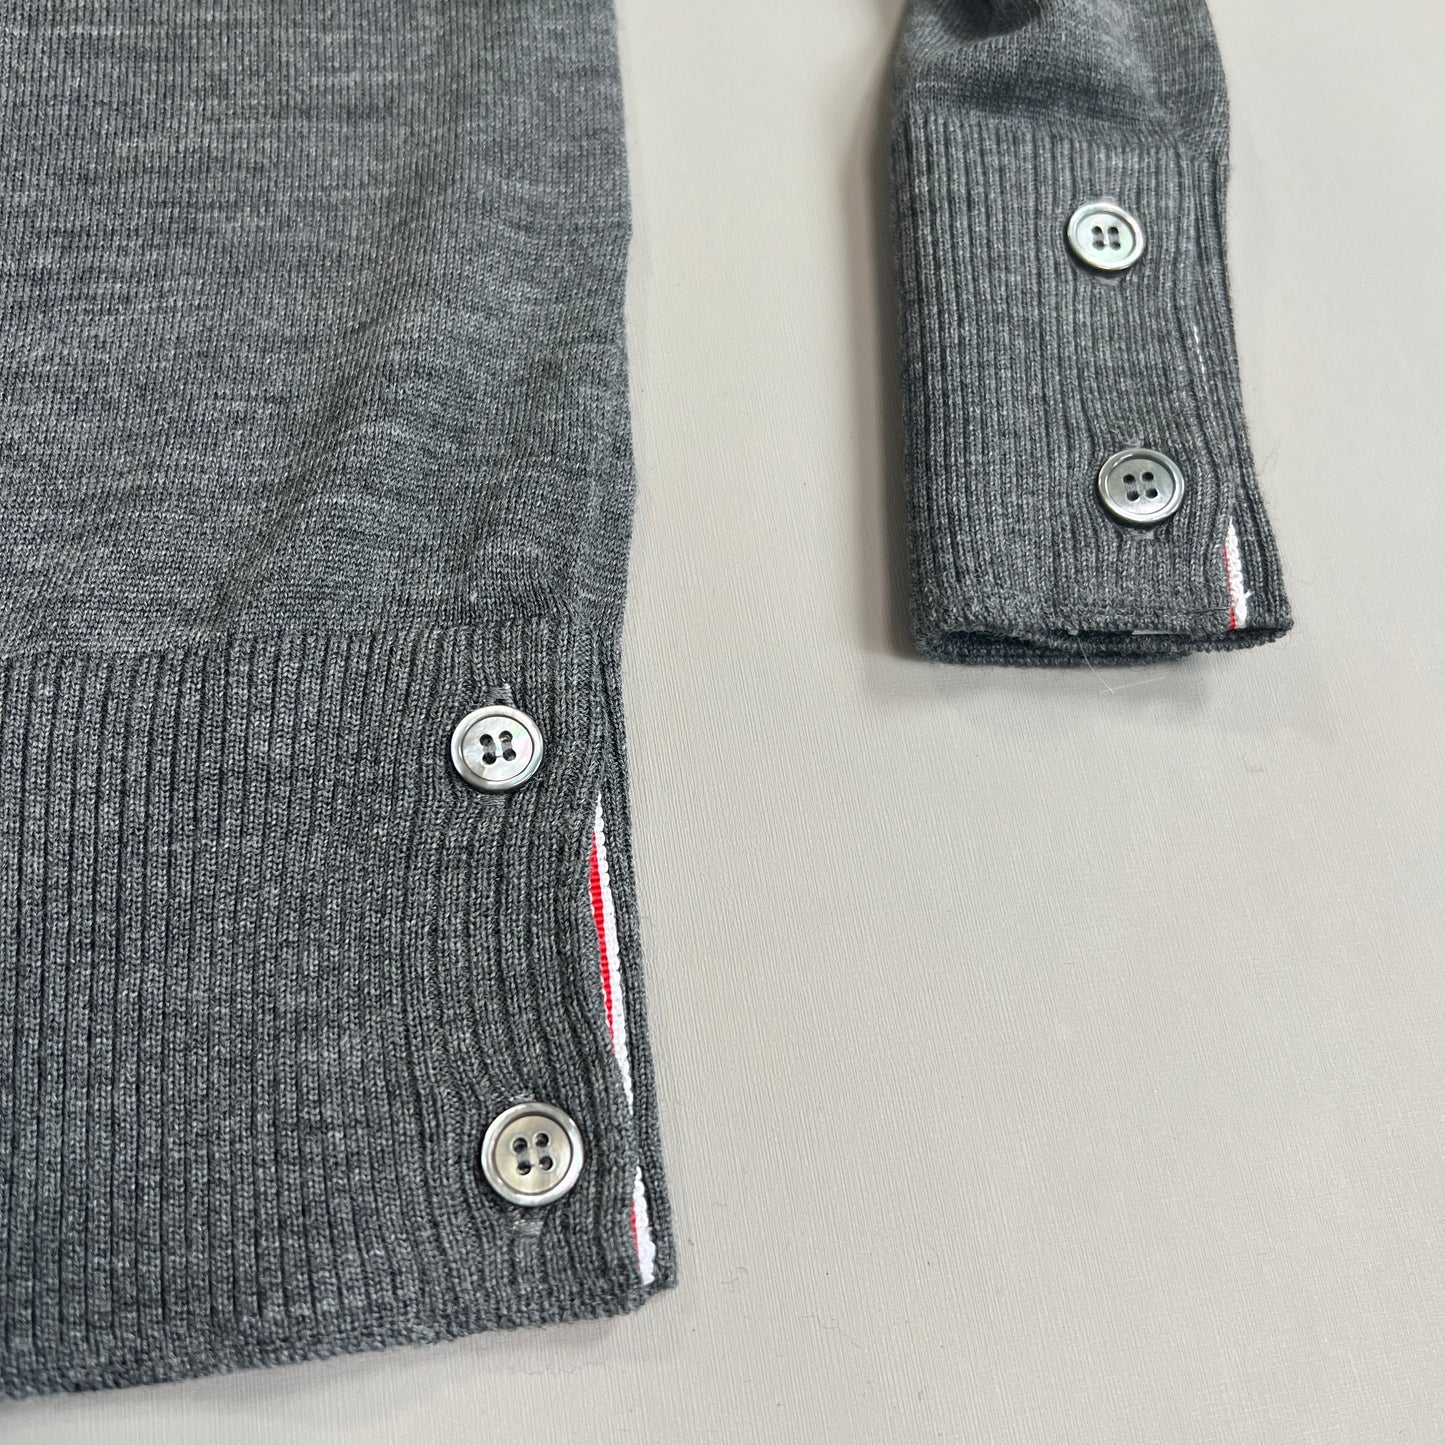 THOM BROWNE New York Classic Crewneck Pullover w/4 Bar Sleeve in Sustainable Fine Merino Wool Med Grey Size 5 (New)